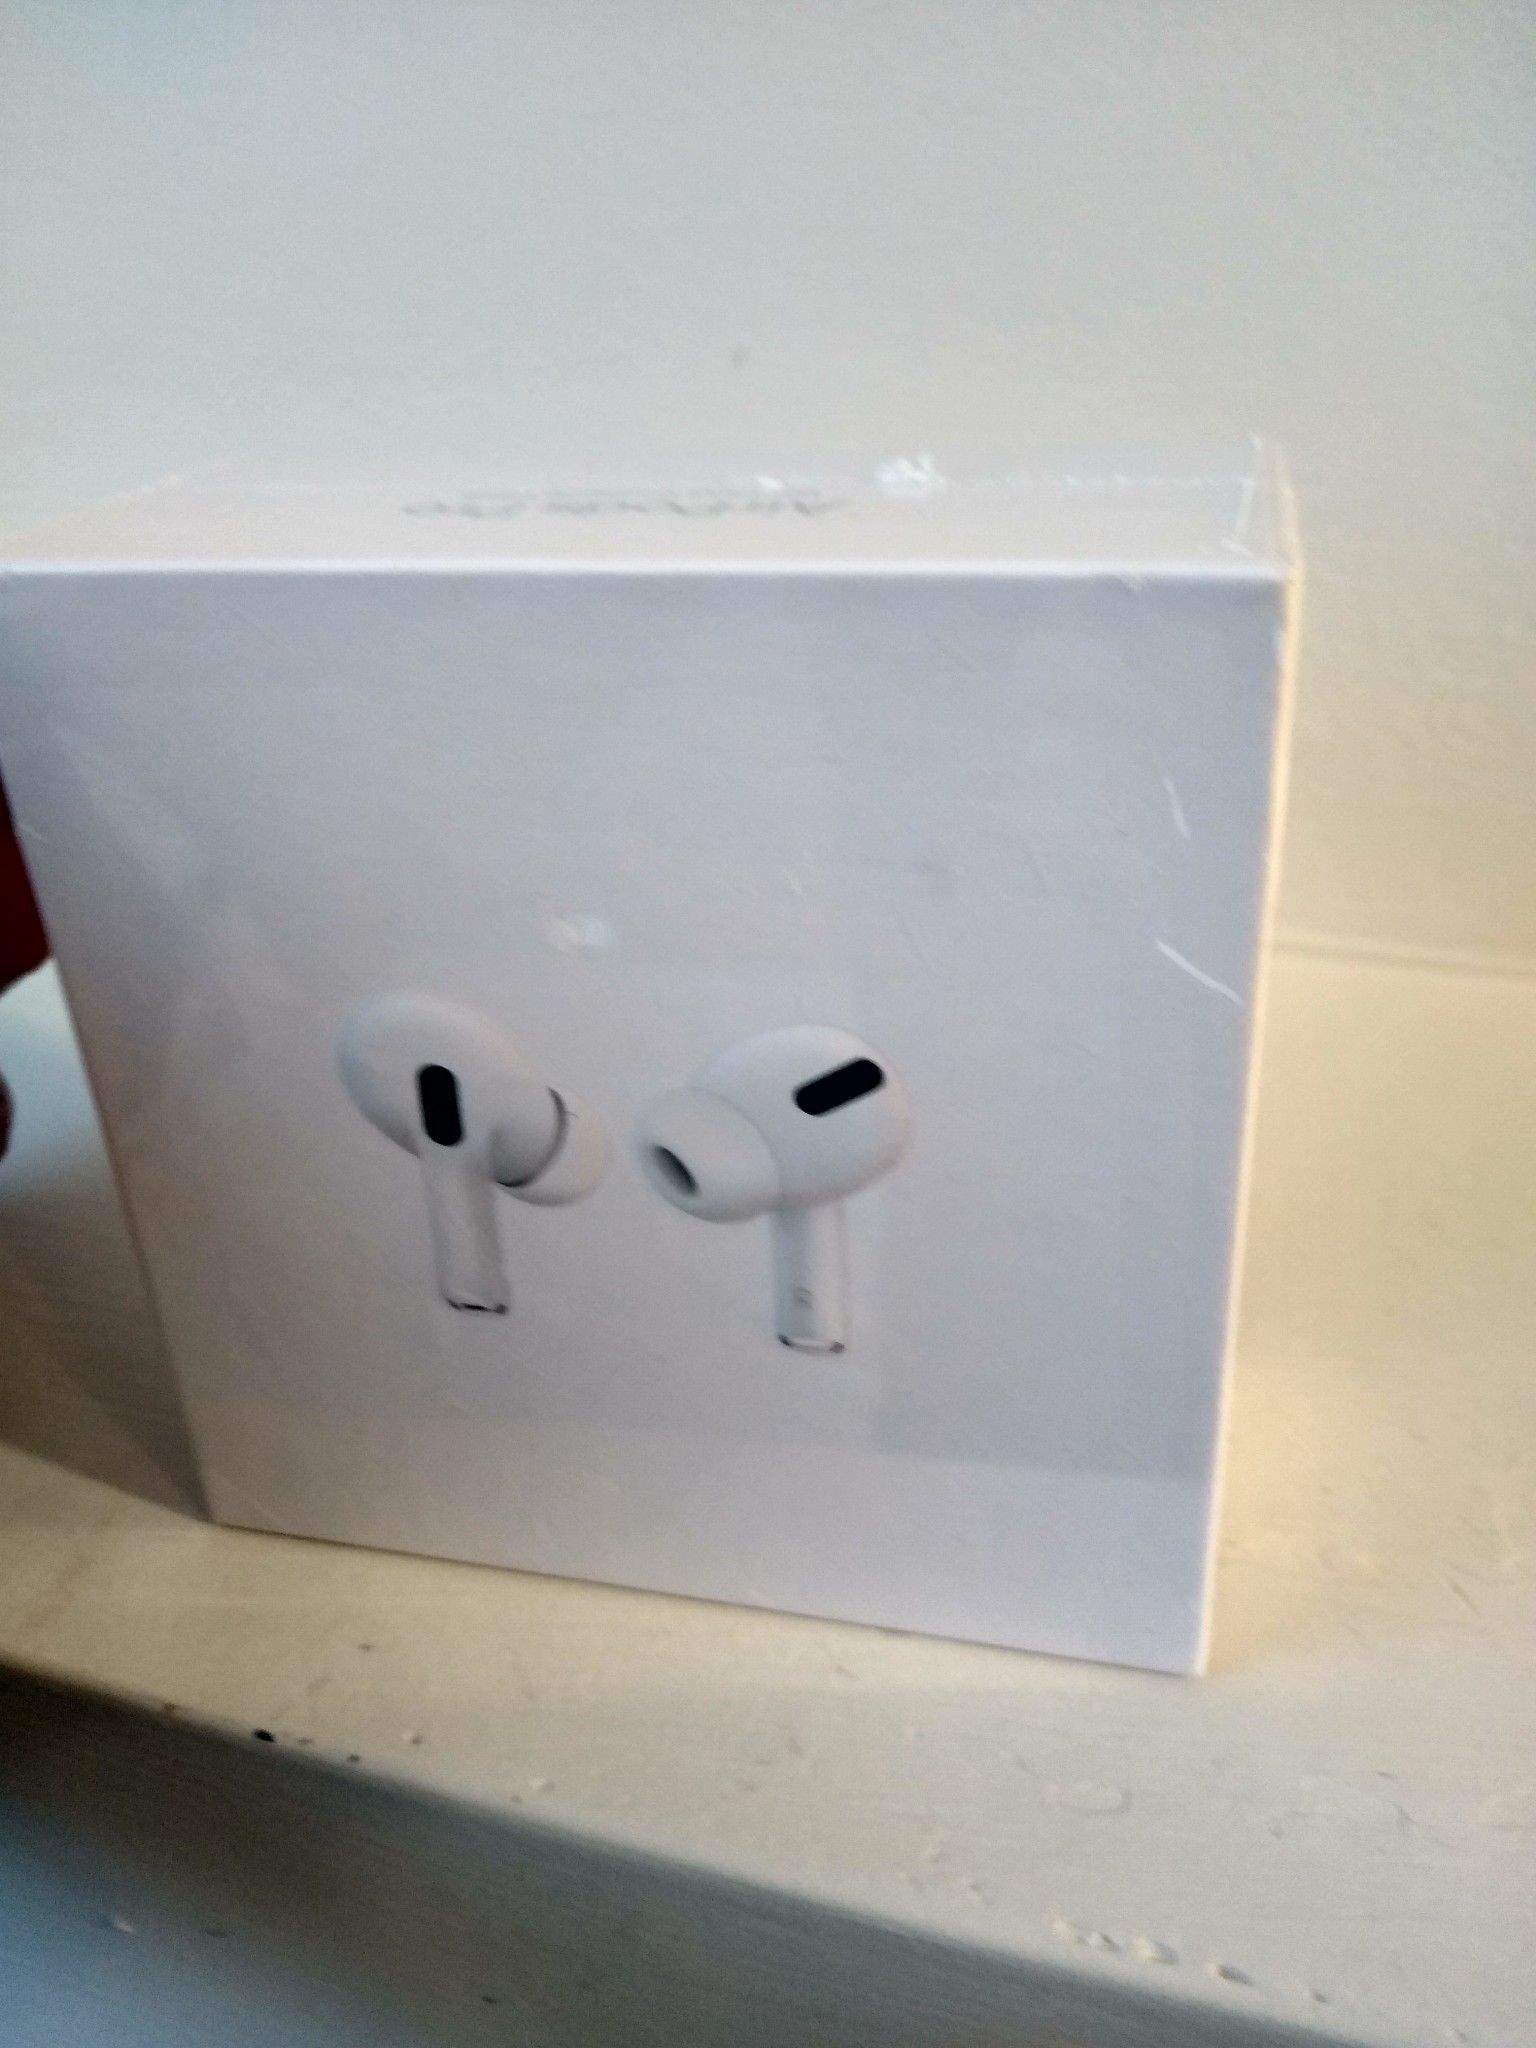 Brand new airpods pros in box unopened